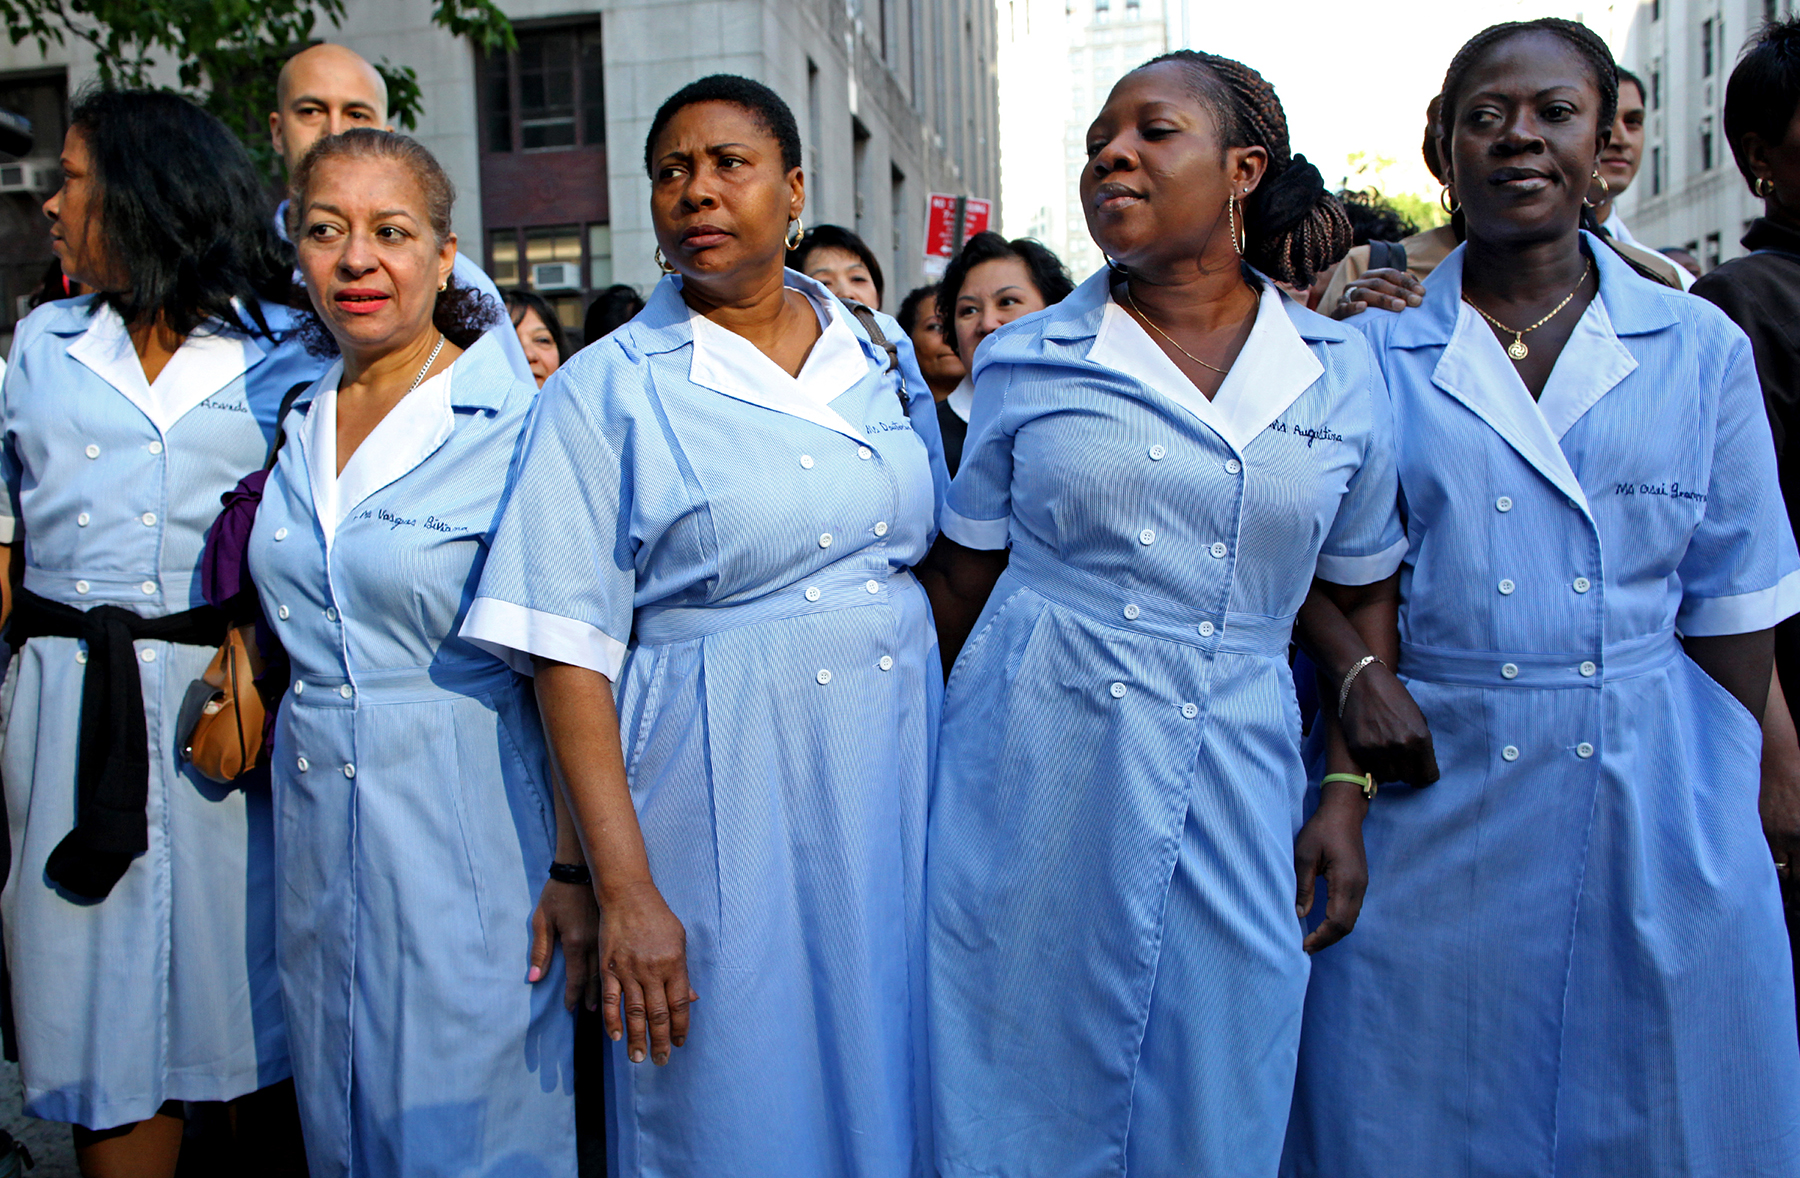  Housekeepers wait outside court for Dominique Strauss-Kahn, accused in sexual assault of colleague, 2011 